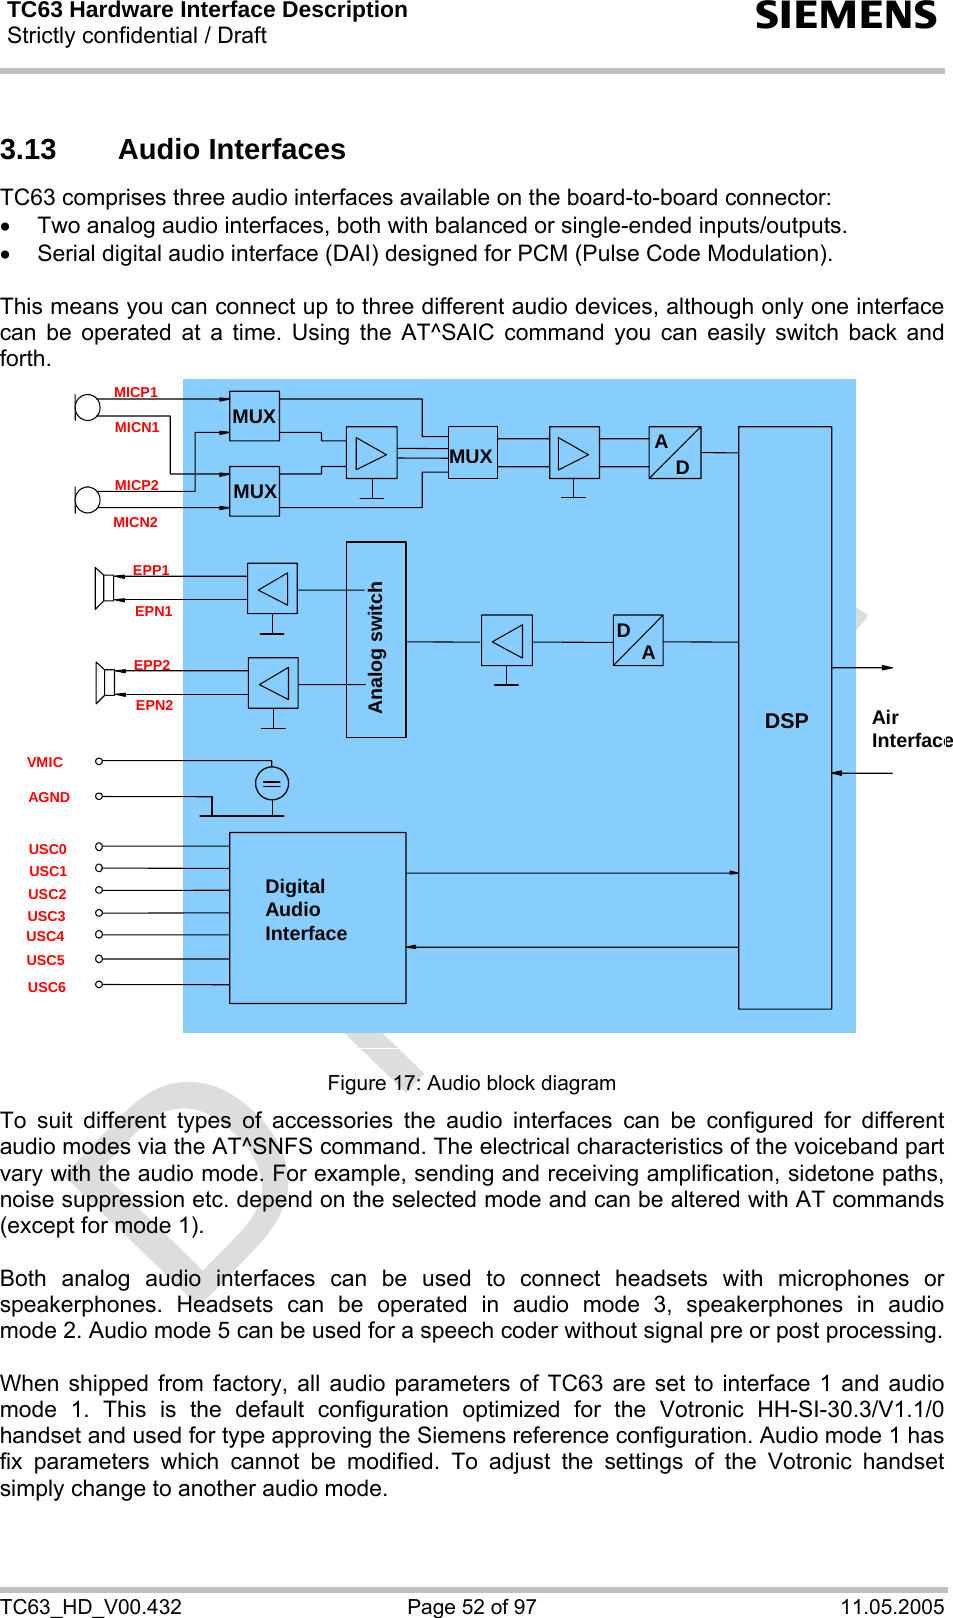 TC63 Hardware Interface Description Strictly confidential / Draft  s TC63_HD_V00.432  Page 52 of 97  11.05.2005 3.13 Audio Interfaces TC63 comprises three audio interfaces available on the board-to-board connector:  •  Two analog audio interfaces, both with balanced or single-ended inputs/outputs. •  Serial digital audio interface (DAI) designed for PCM (Pulse Code Modulation).  This means you can connect up to three different audio devices, although only one interface can be operated at a time. Using the AT^SAIC command you can easily switch back and forth.   Analog switch Digital Audio Interface AirInterfaceDSP MUX MUXD AMICN2 MICP2 MICN1 MICP1 USC6 USC5 USC4 USC3 USC2 AGND USC0 USC1 DA EPP2 EPN2 EPP1 EPN1 VMIC MUX  Figure 17: Audio block diagram To suit different types of accessories the audio interfaces can be configured for different audio modes via the AT^SNFS command. The electrical characteristics of the voiceband part vary with the audio mode. For example, sending and receiving amplification, sidetone paths, noise suppression etc. depend on the selected mode and can be altered with AT commands (except for mode 1).  Both analog audio interfaces can be used to connect headsets with microphones or speakerphones. Headsets can be operated in audio mode 3, speakerphones in audio mode 2. Audio mode 5 can be used for a speech coder without signal pre or post processing.   When shipped from factory, all audio parameters of TC63 are set to interface 1 and audio mode 1. This is the default configuration optimized for the Votronic HH-SI-30.3/V1.1/0 handset and used for type approving the Siemens reference configuration. Audio mode 1 has fix parameters which cannot be modified. To adjust the settings of the Votronic handset simply change to another audio mode. 